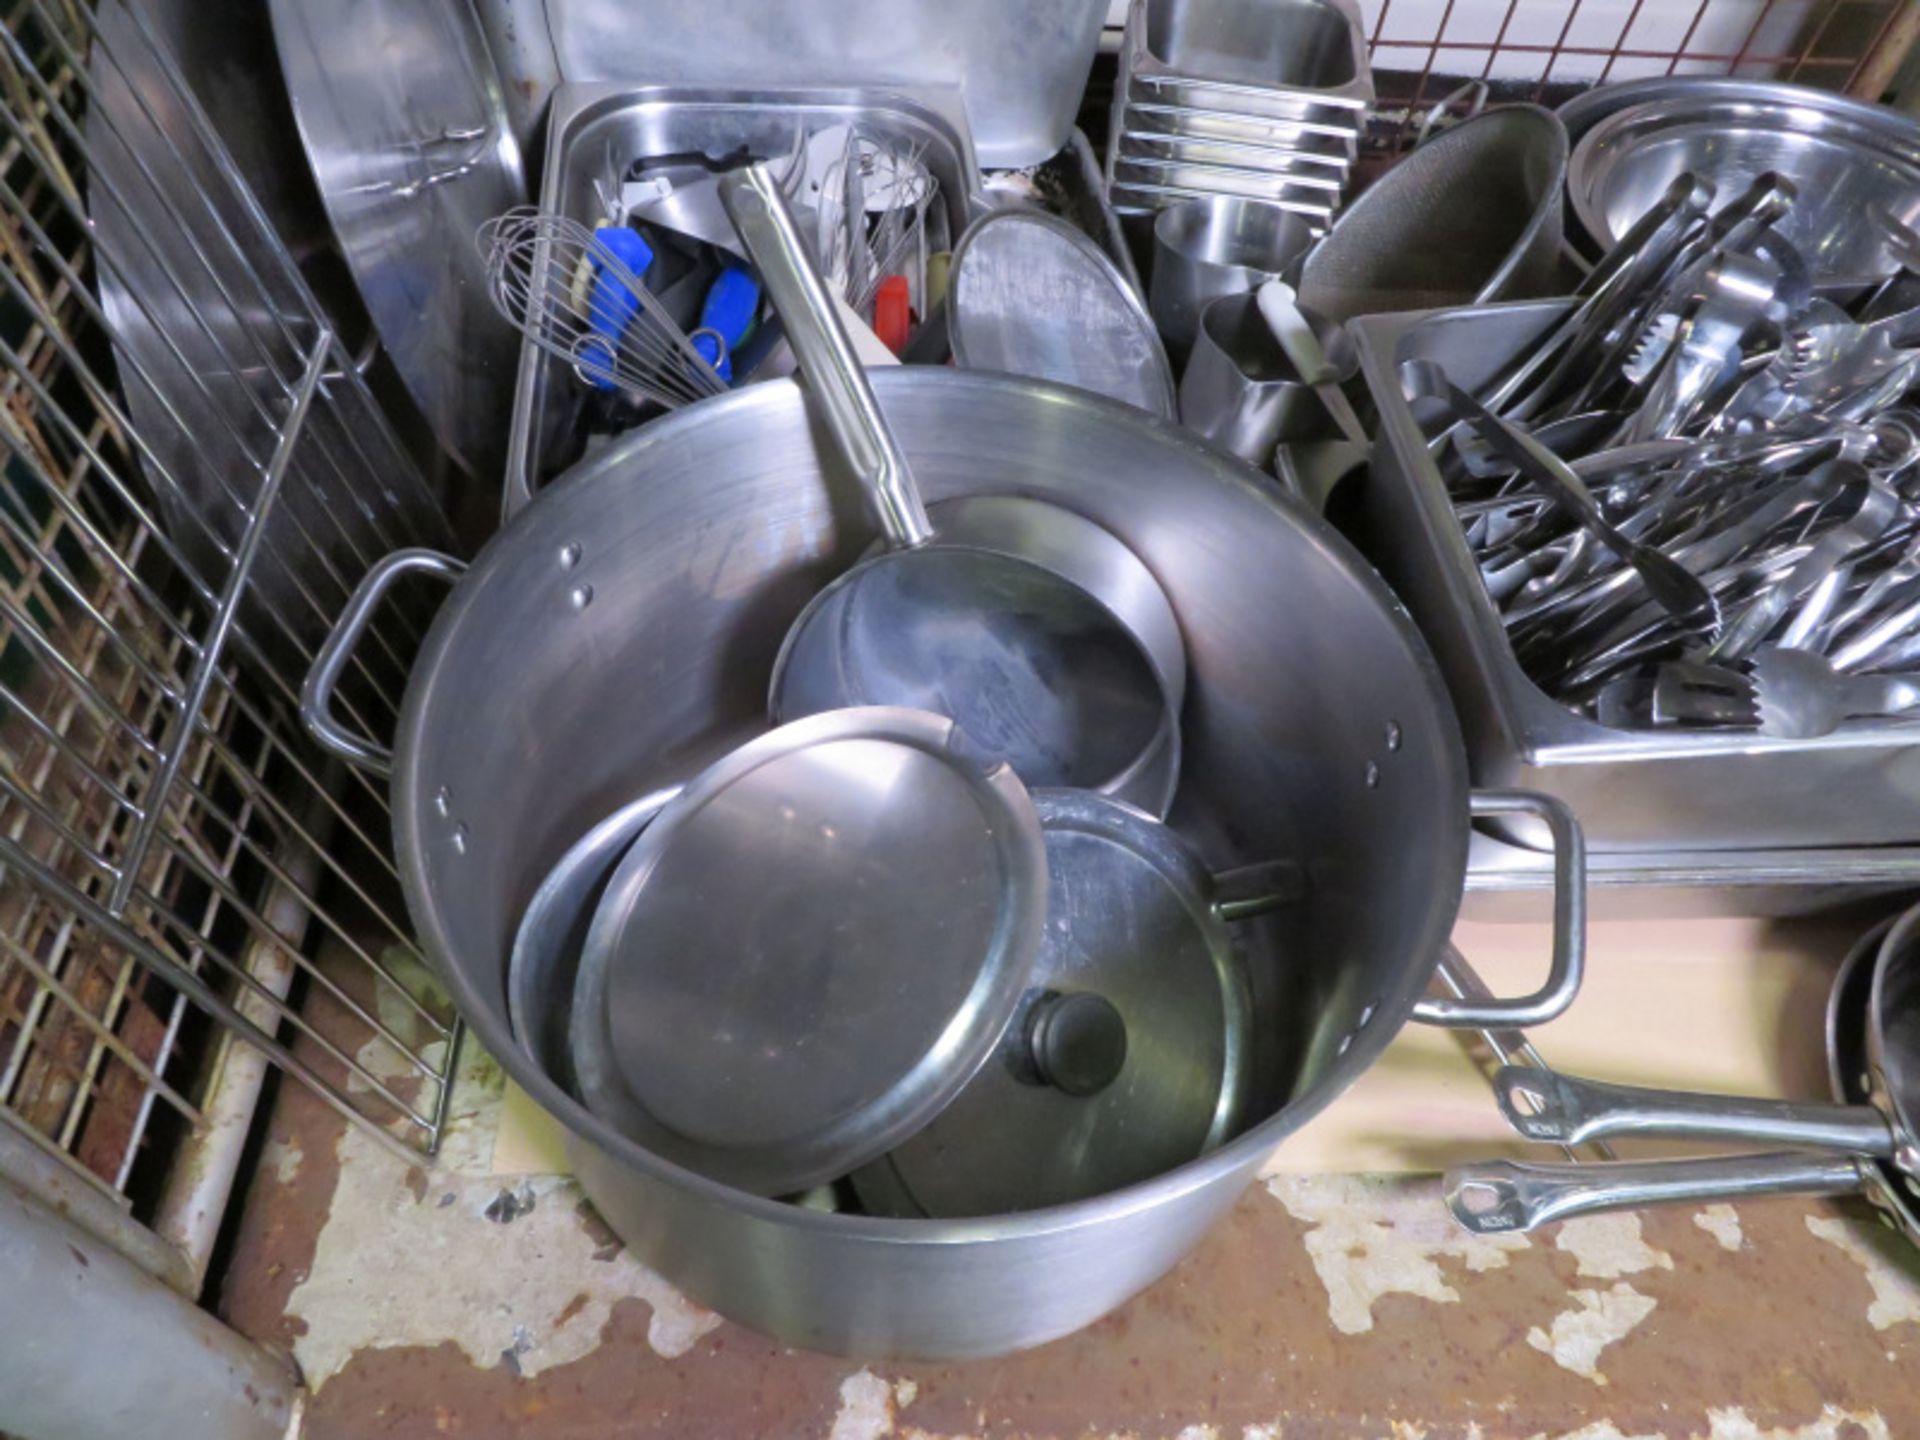 Stainless Steel Catering Equipment - gastronorm pans, cooking pot, shelf, pans, mixing bowls & more - Image 2 of 6